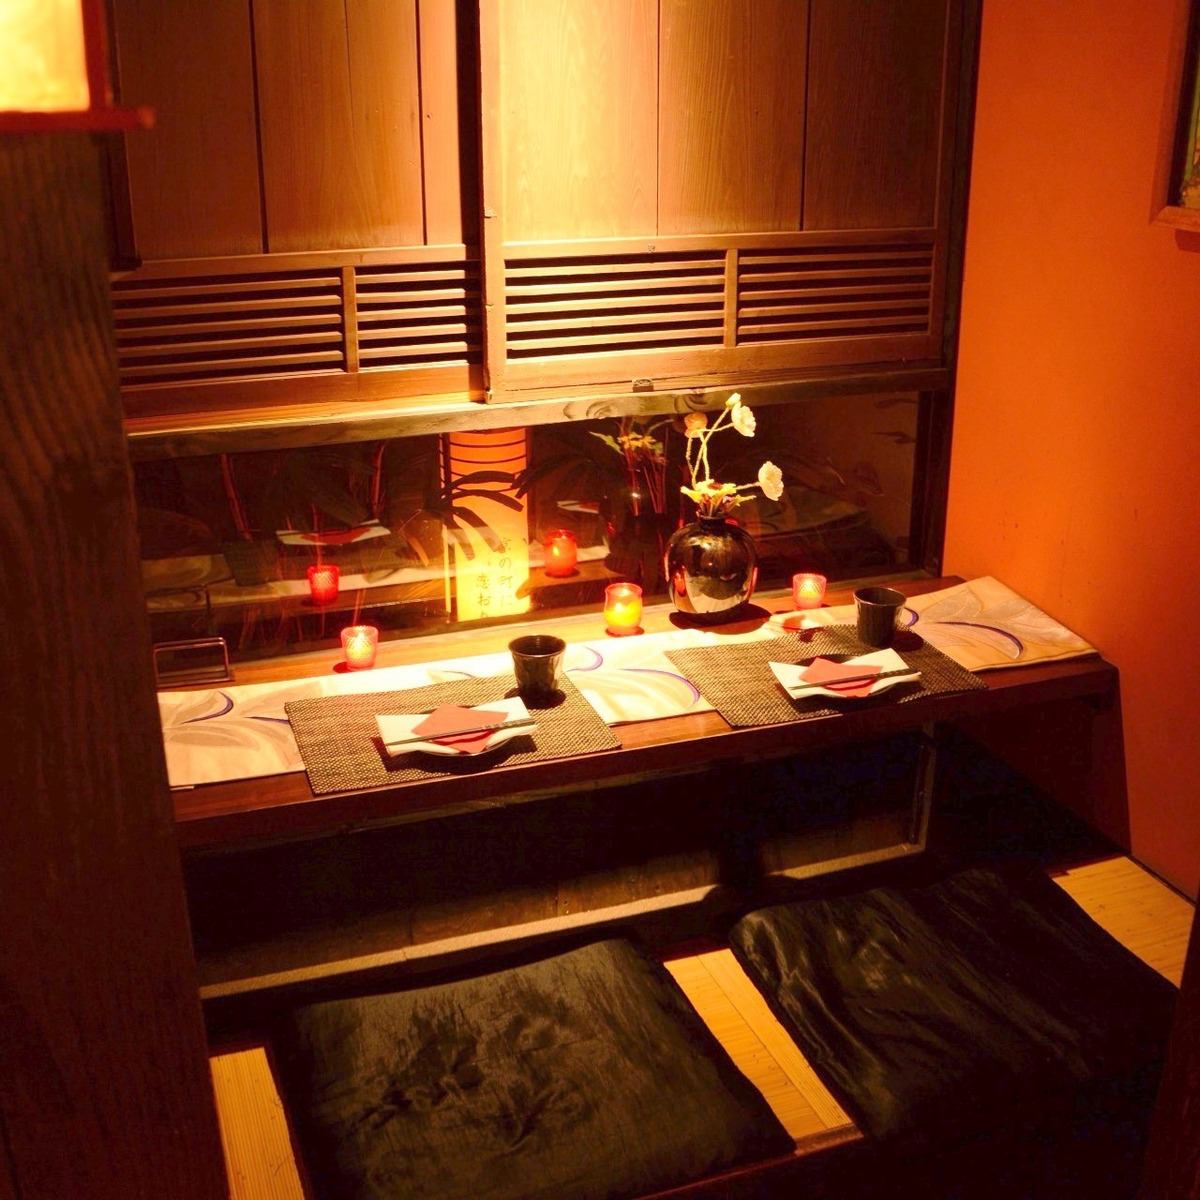 [Popular] Recommended for dates ♪ 14 private rooms for 2 people! For a relaxing date ♪